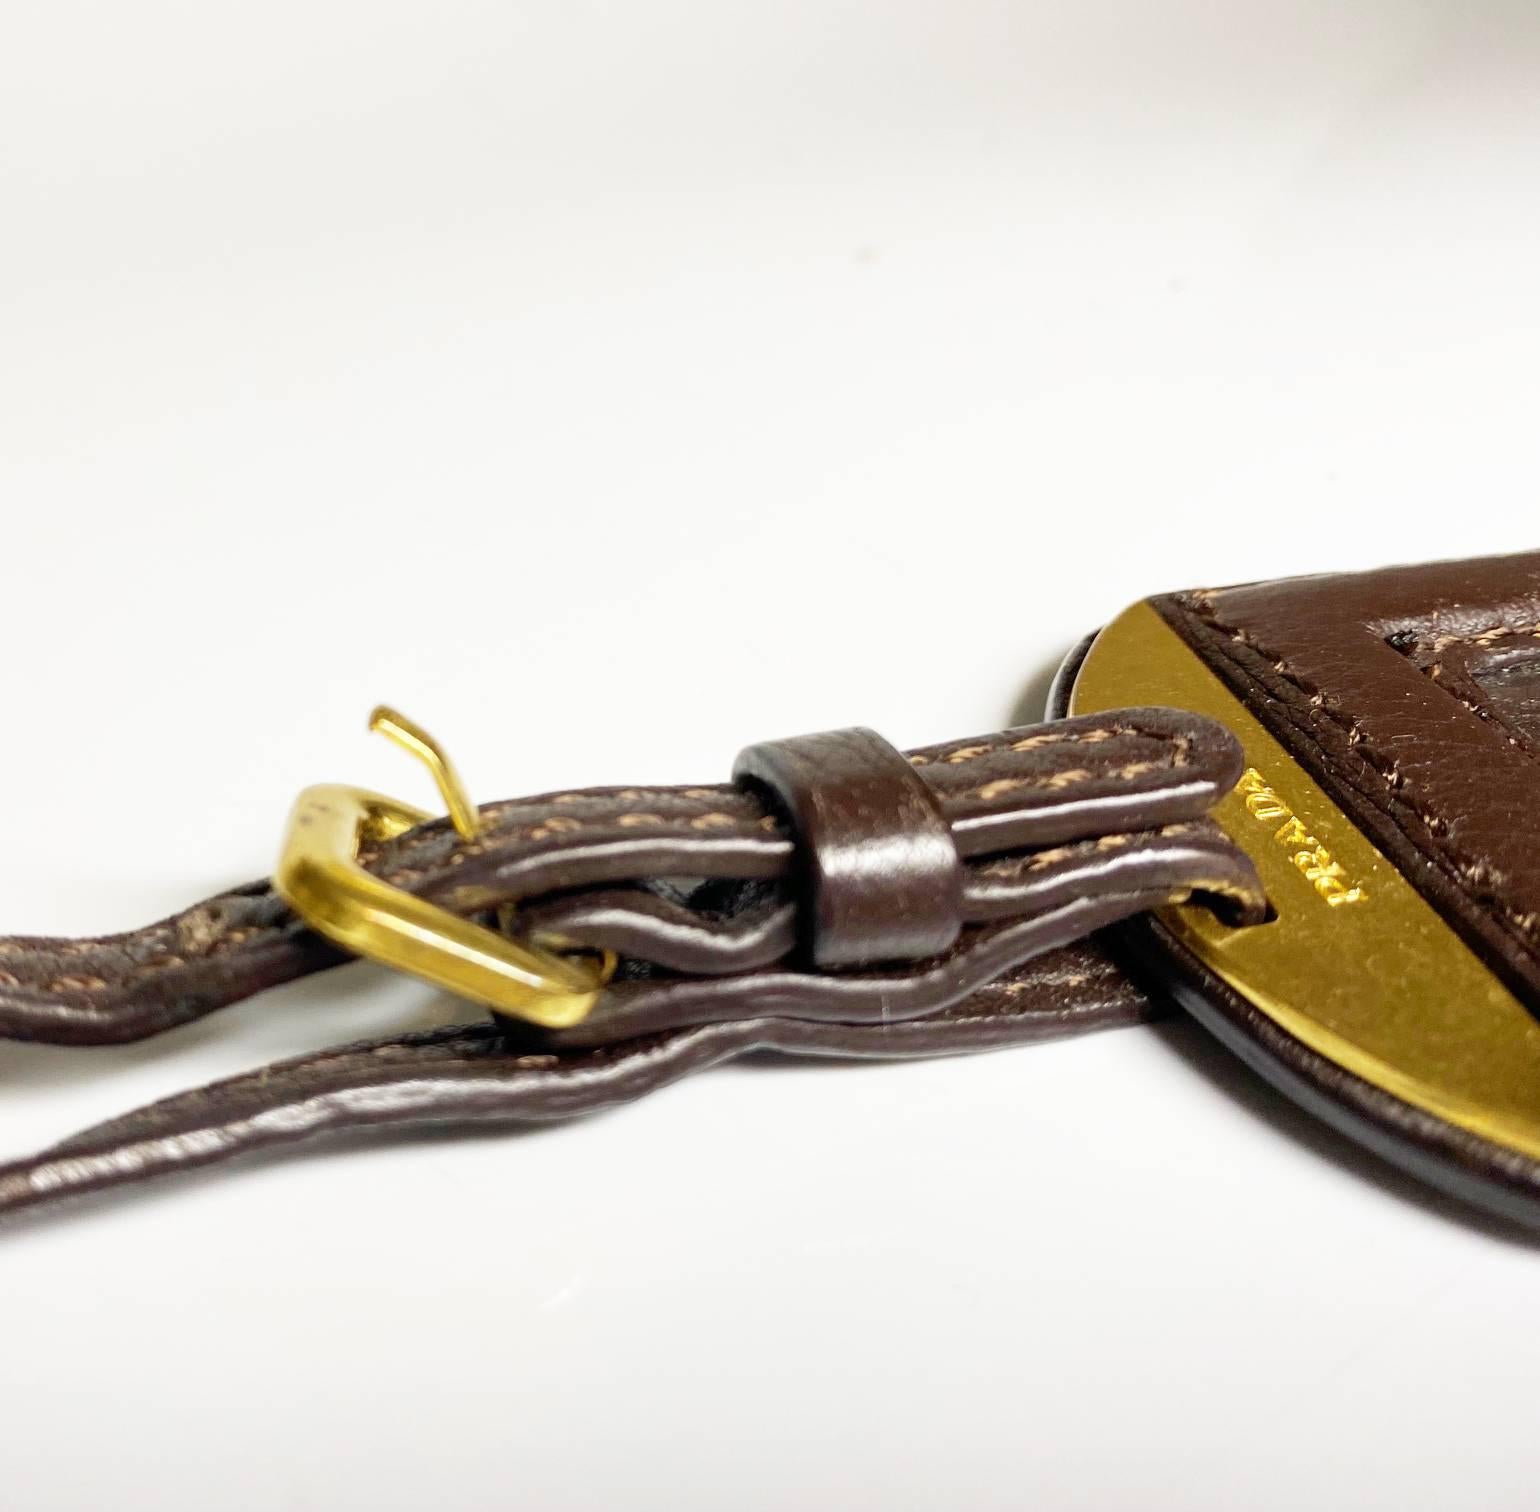 <p>Experience ultimate luxury with the 2000s Prada Chocolate Brown Leather Travel Tag adorned with opulent gold hardware and crafted from premium leather. With an adjustable strap length, this exquisite accessory exudes effortless elegance and